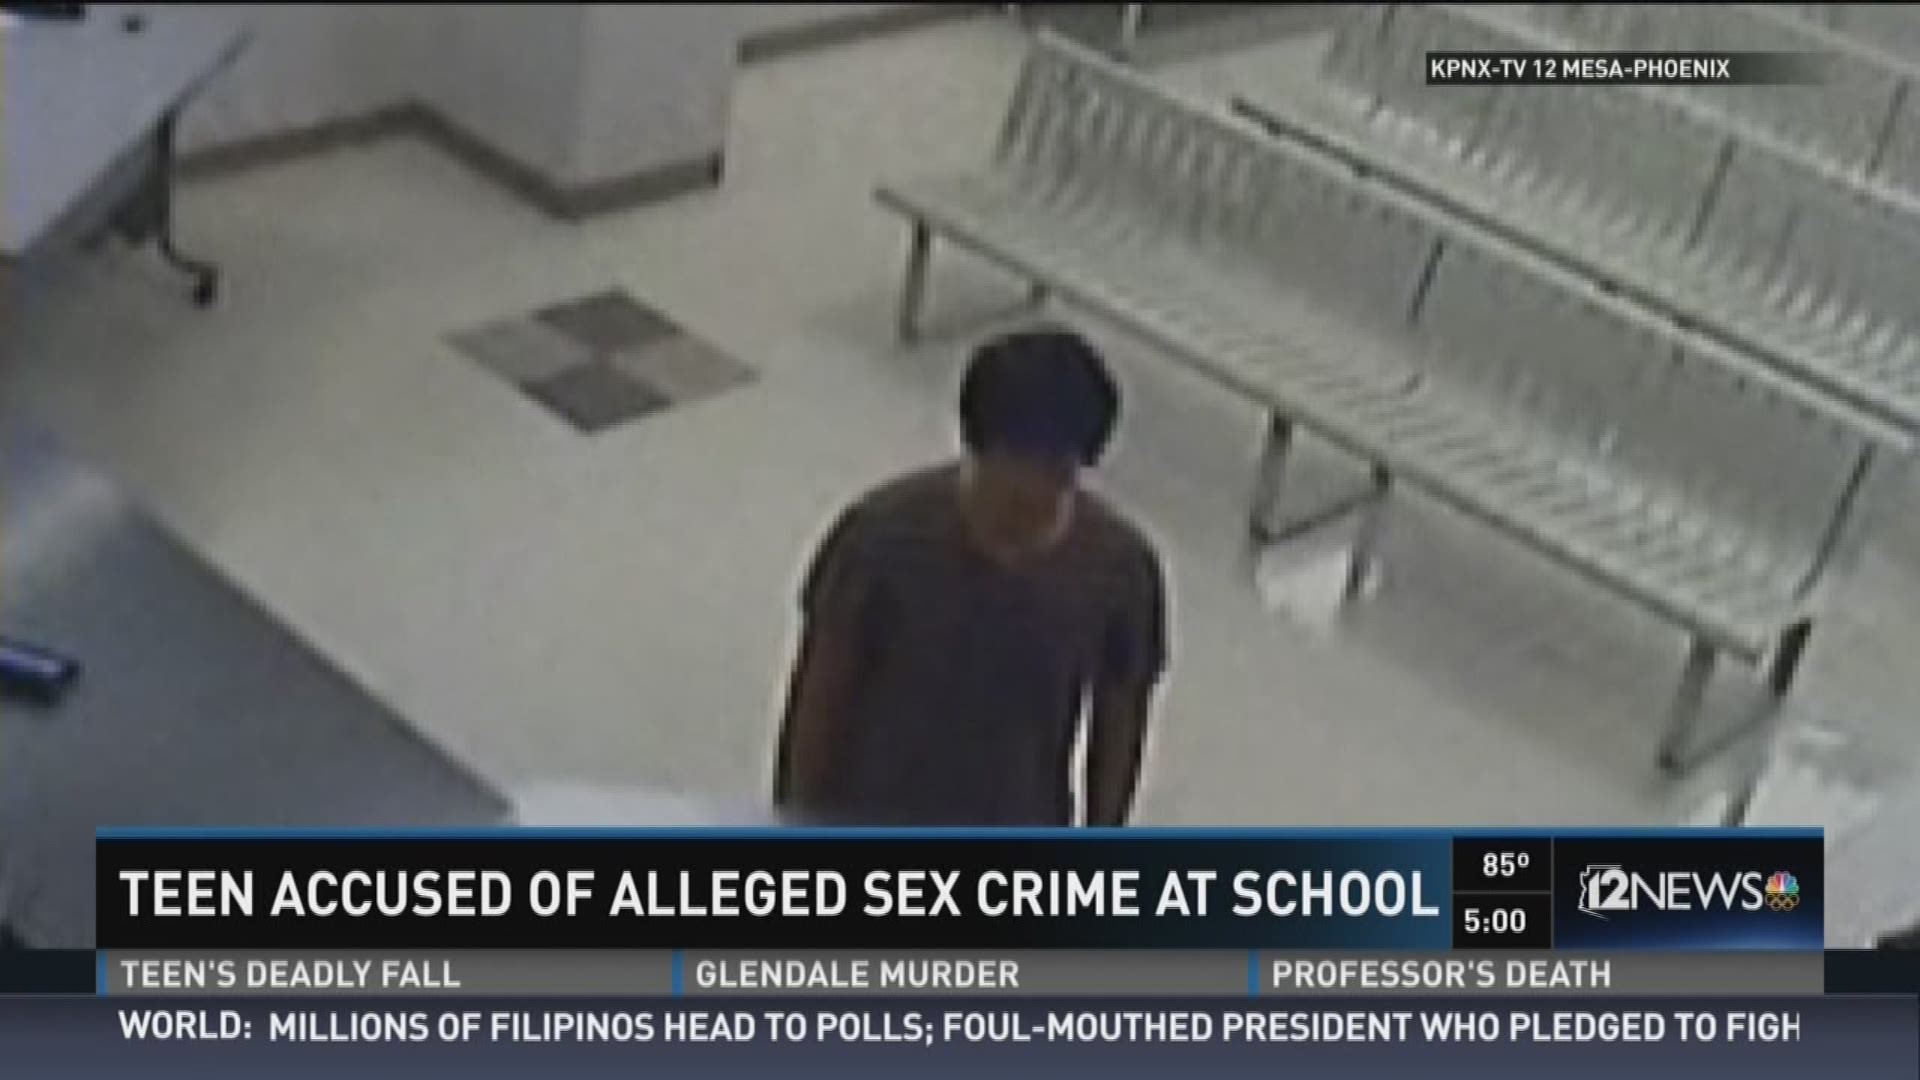 An 18-year-old is behind bars after allegedly sexually assaulting a